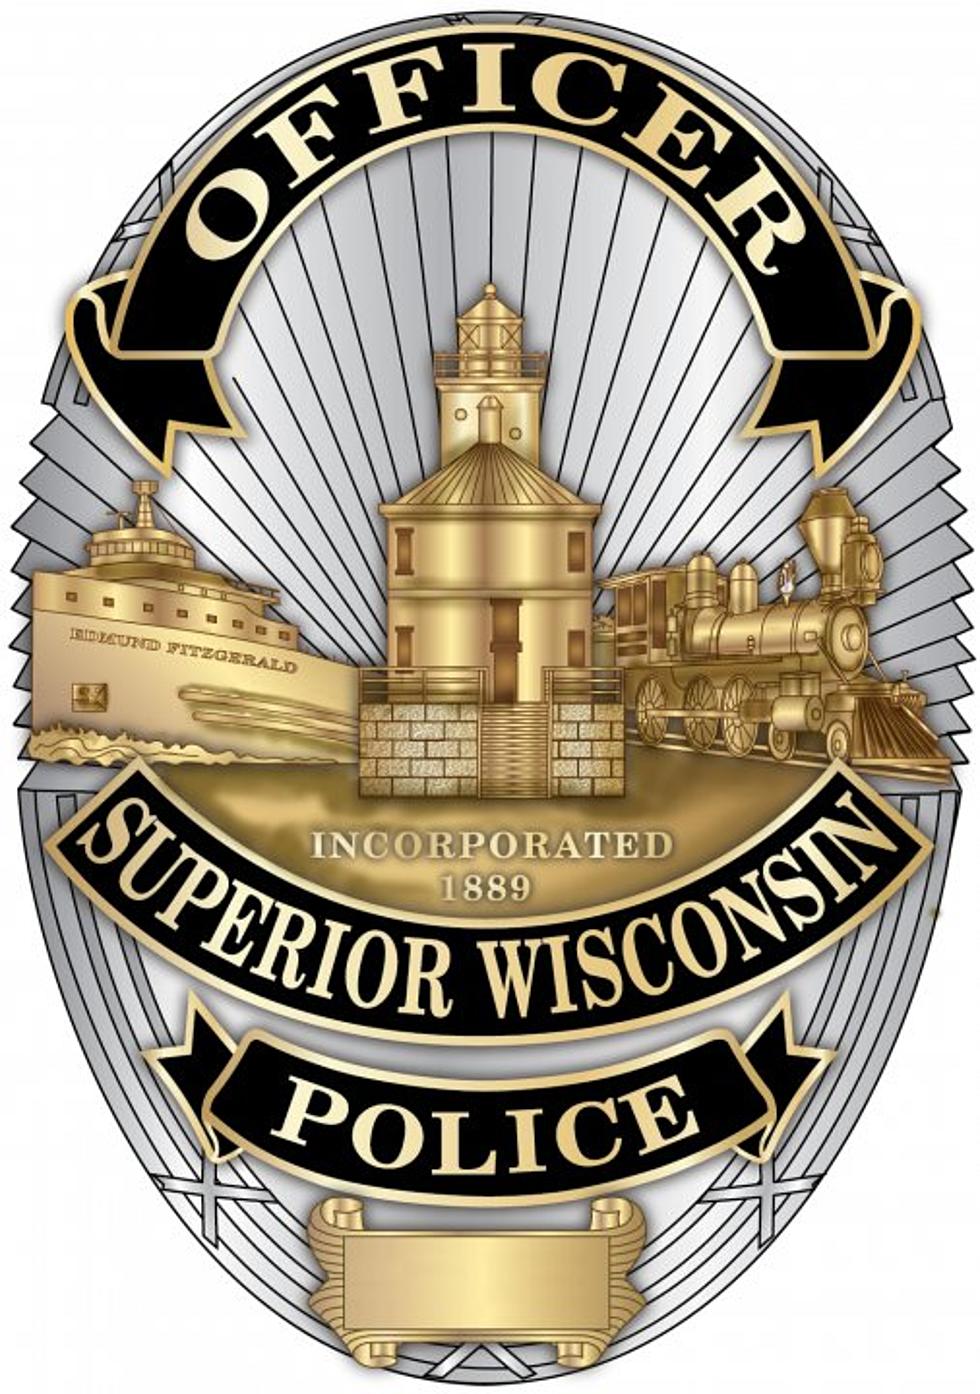 Superior Police Department Invites You To Coffee With A Cop On March 6th